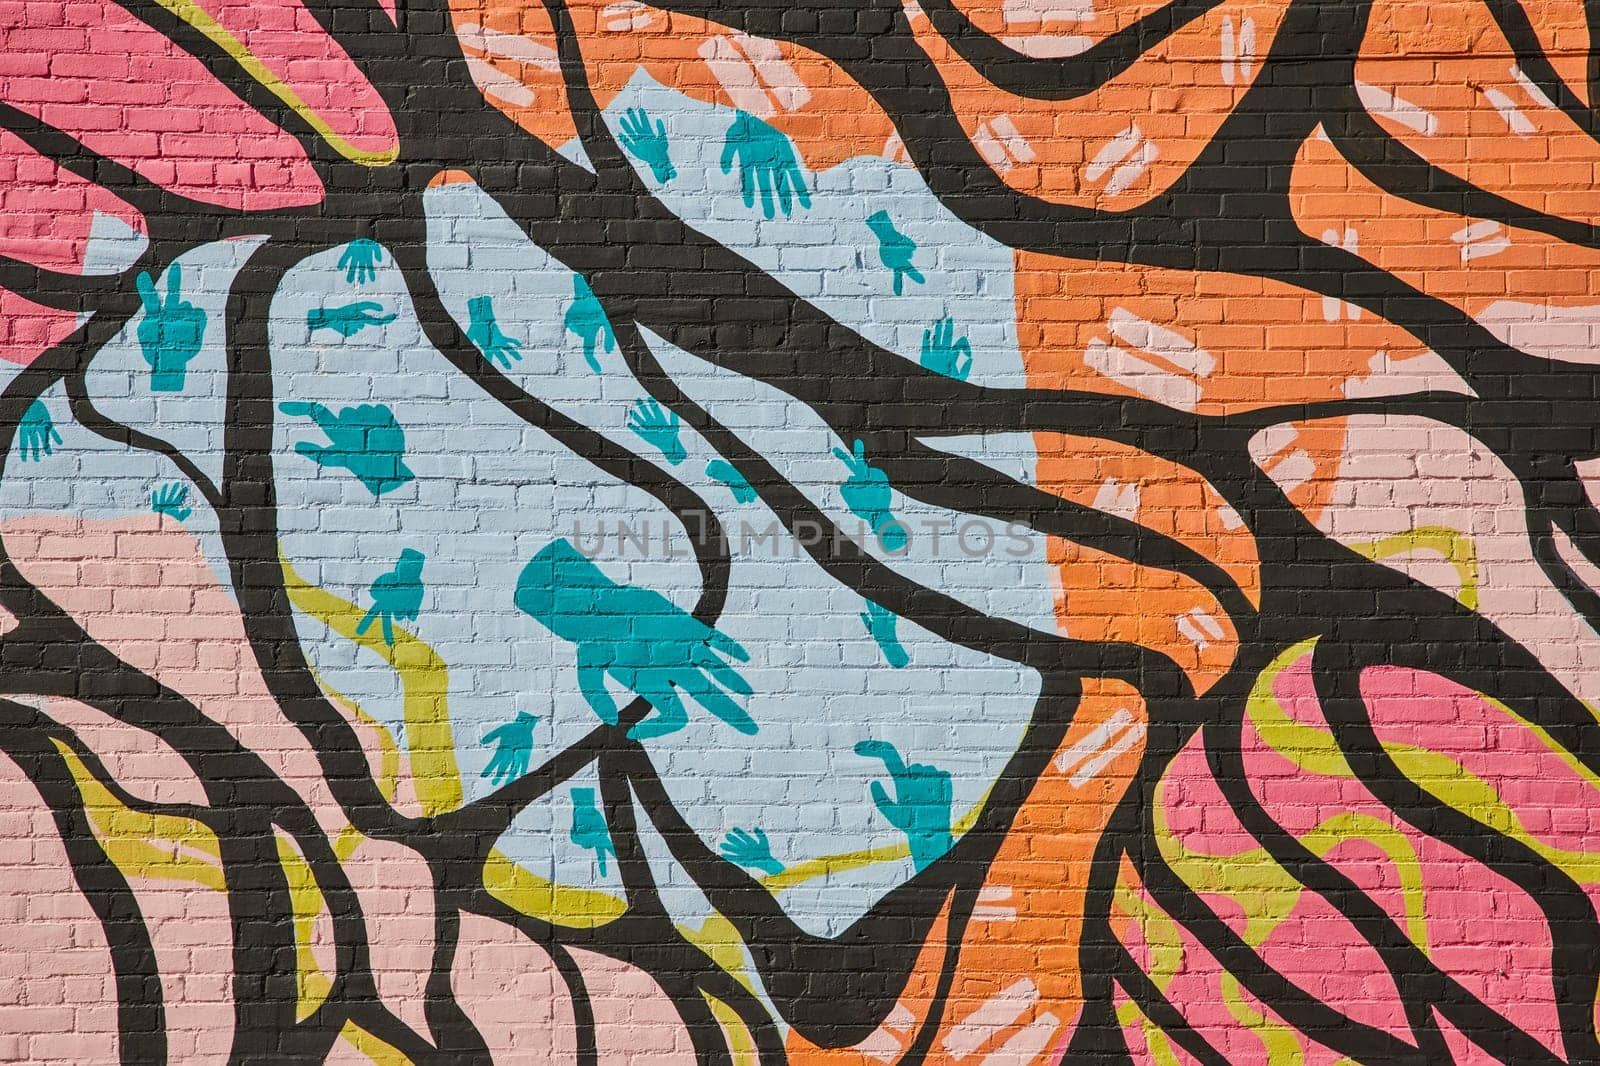 Vibrant Urban Mural in Downtown Muncie, Indiana, 2023 - Colorful Artwork of Organic Shapes and Handprint Silhouettes on Brick Wall